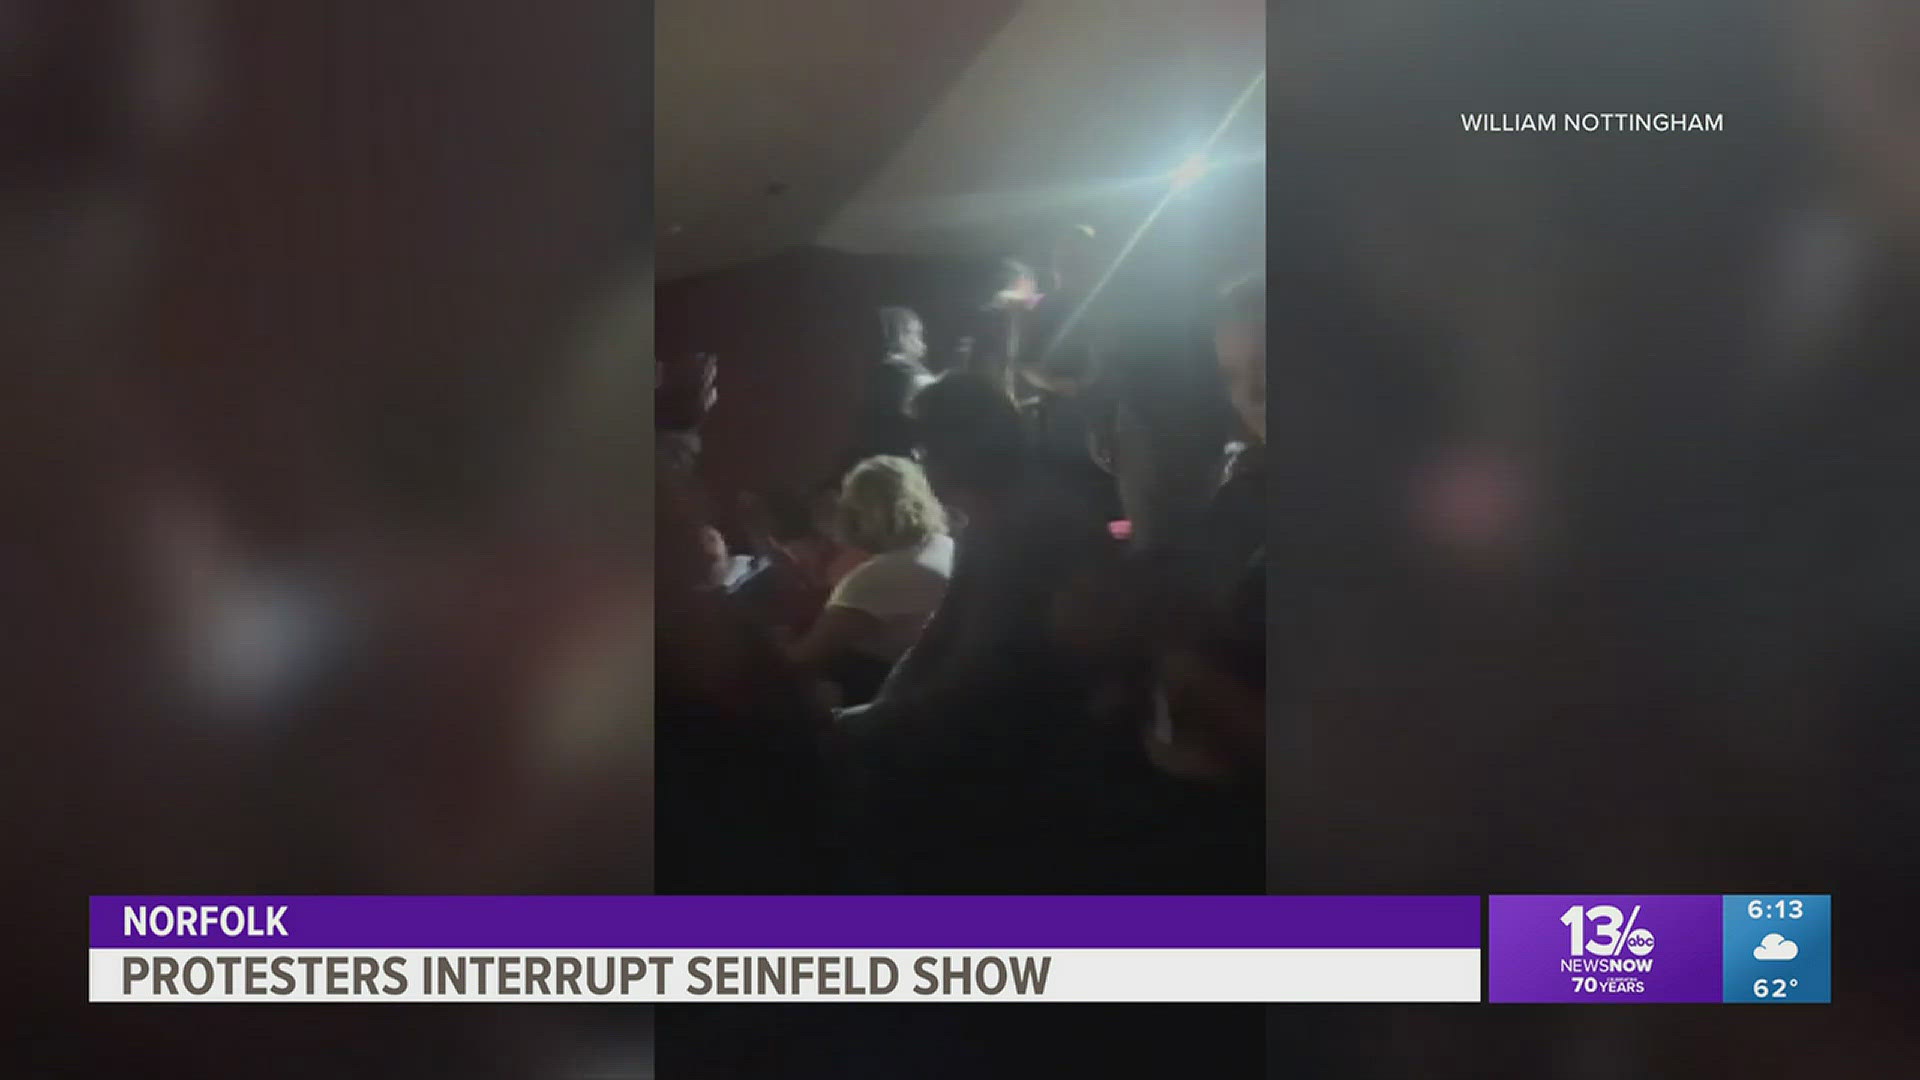 A group of protestors disrupted the Jerry Seinfeld show at Norfolk’s Chrysler Hall Saturday night.